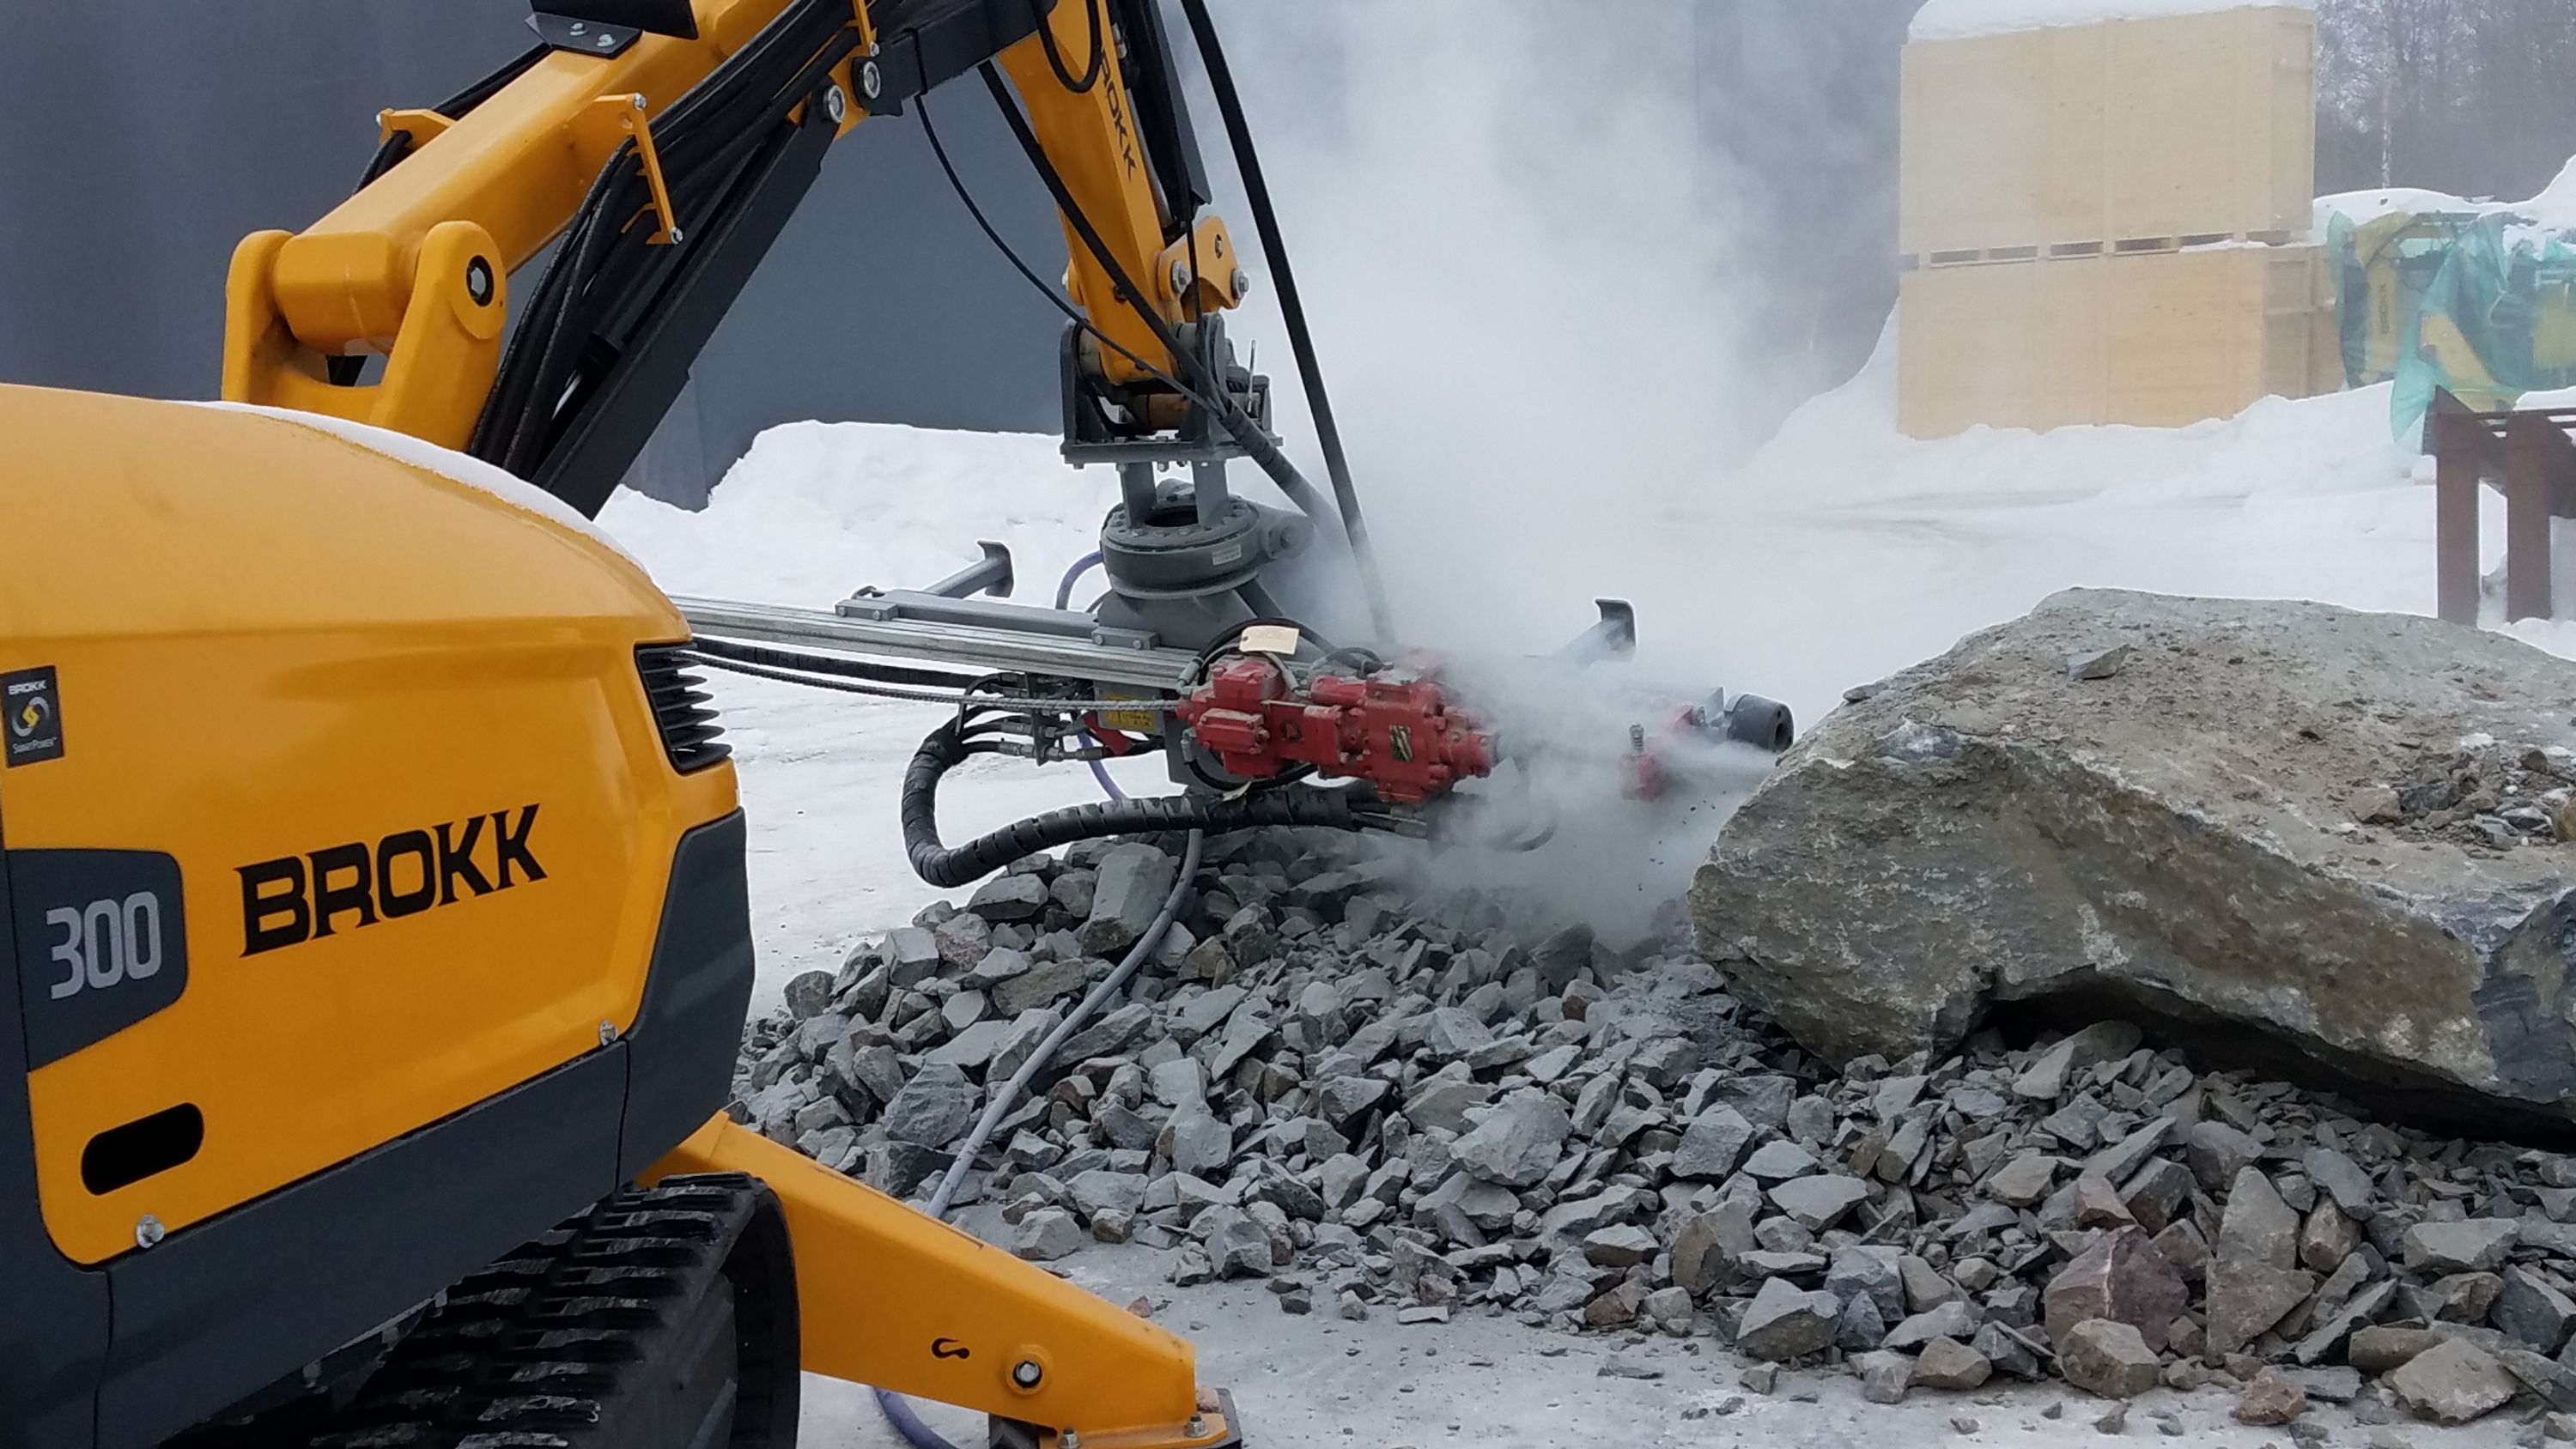 Brokk delivers a sleek, low-profile design and impressive power-to-weight ratio with the new MMB326 hydraulic drifter rock drill attachment from TEI Rock Drills.